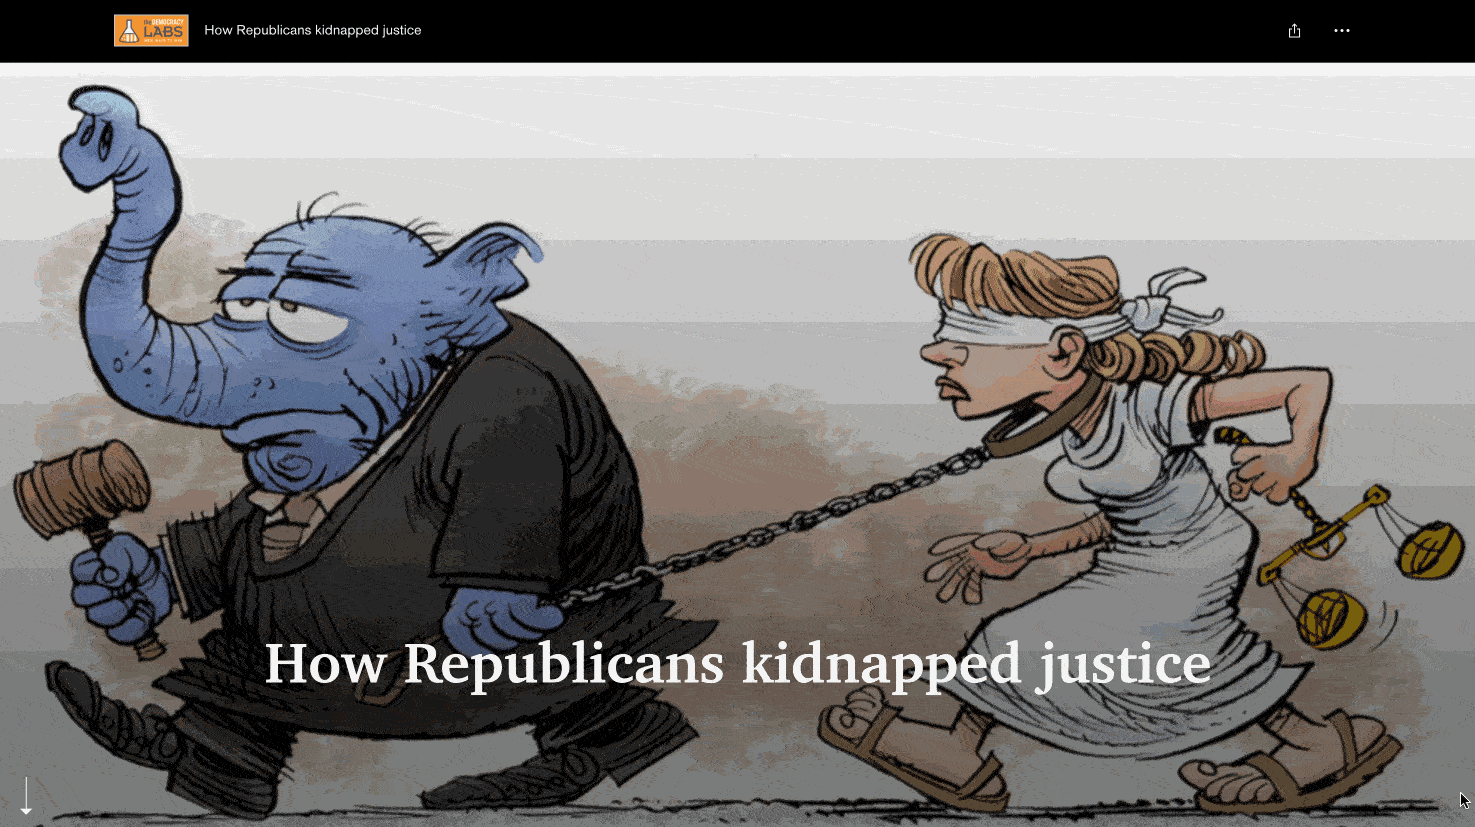 Republicans kidnap justice by stacking the courts